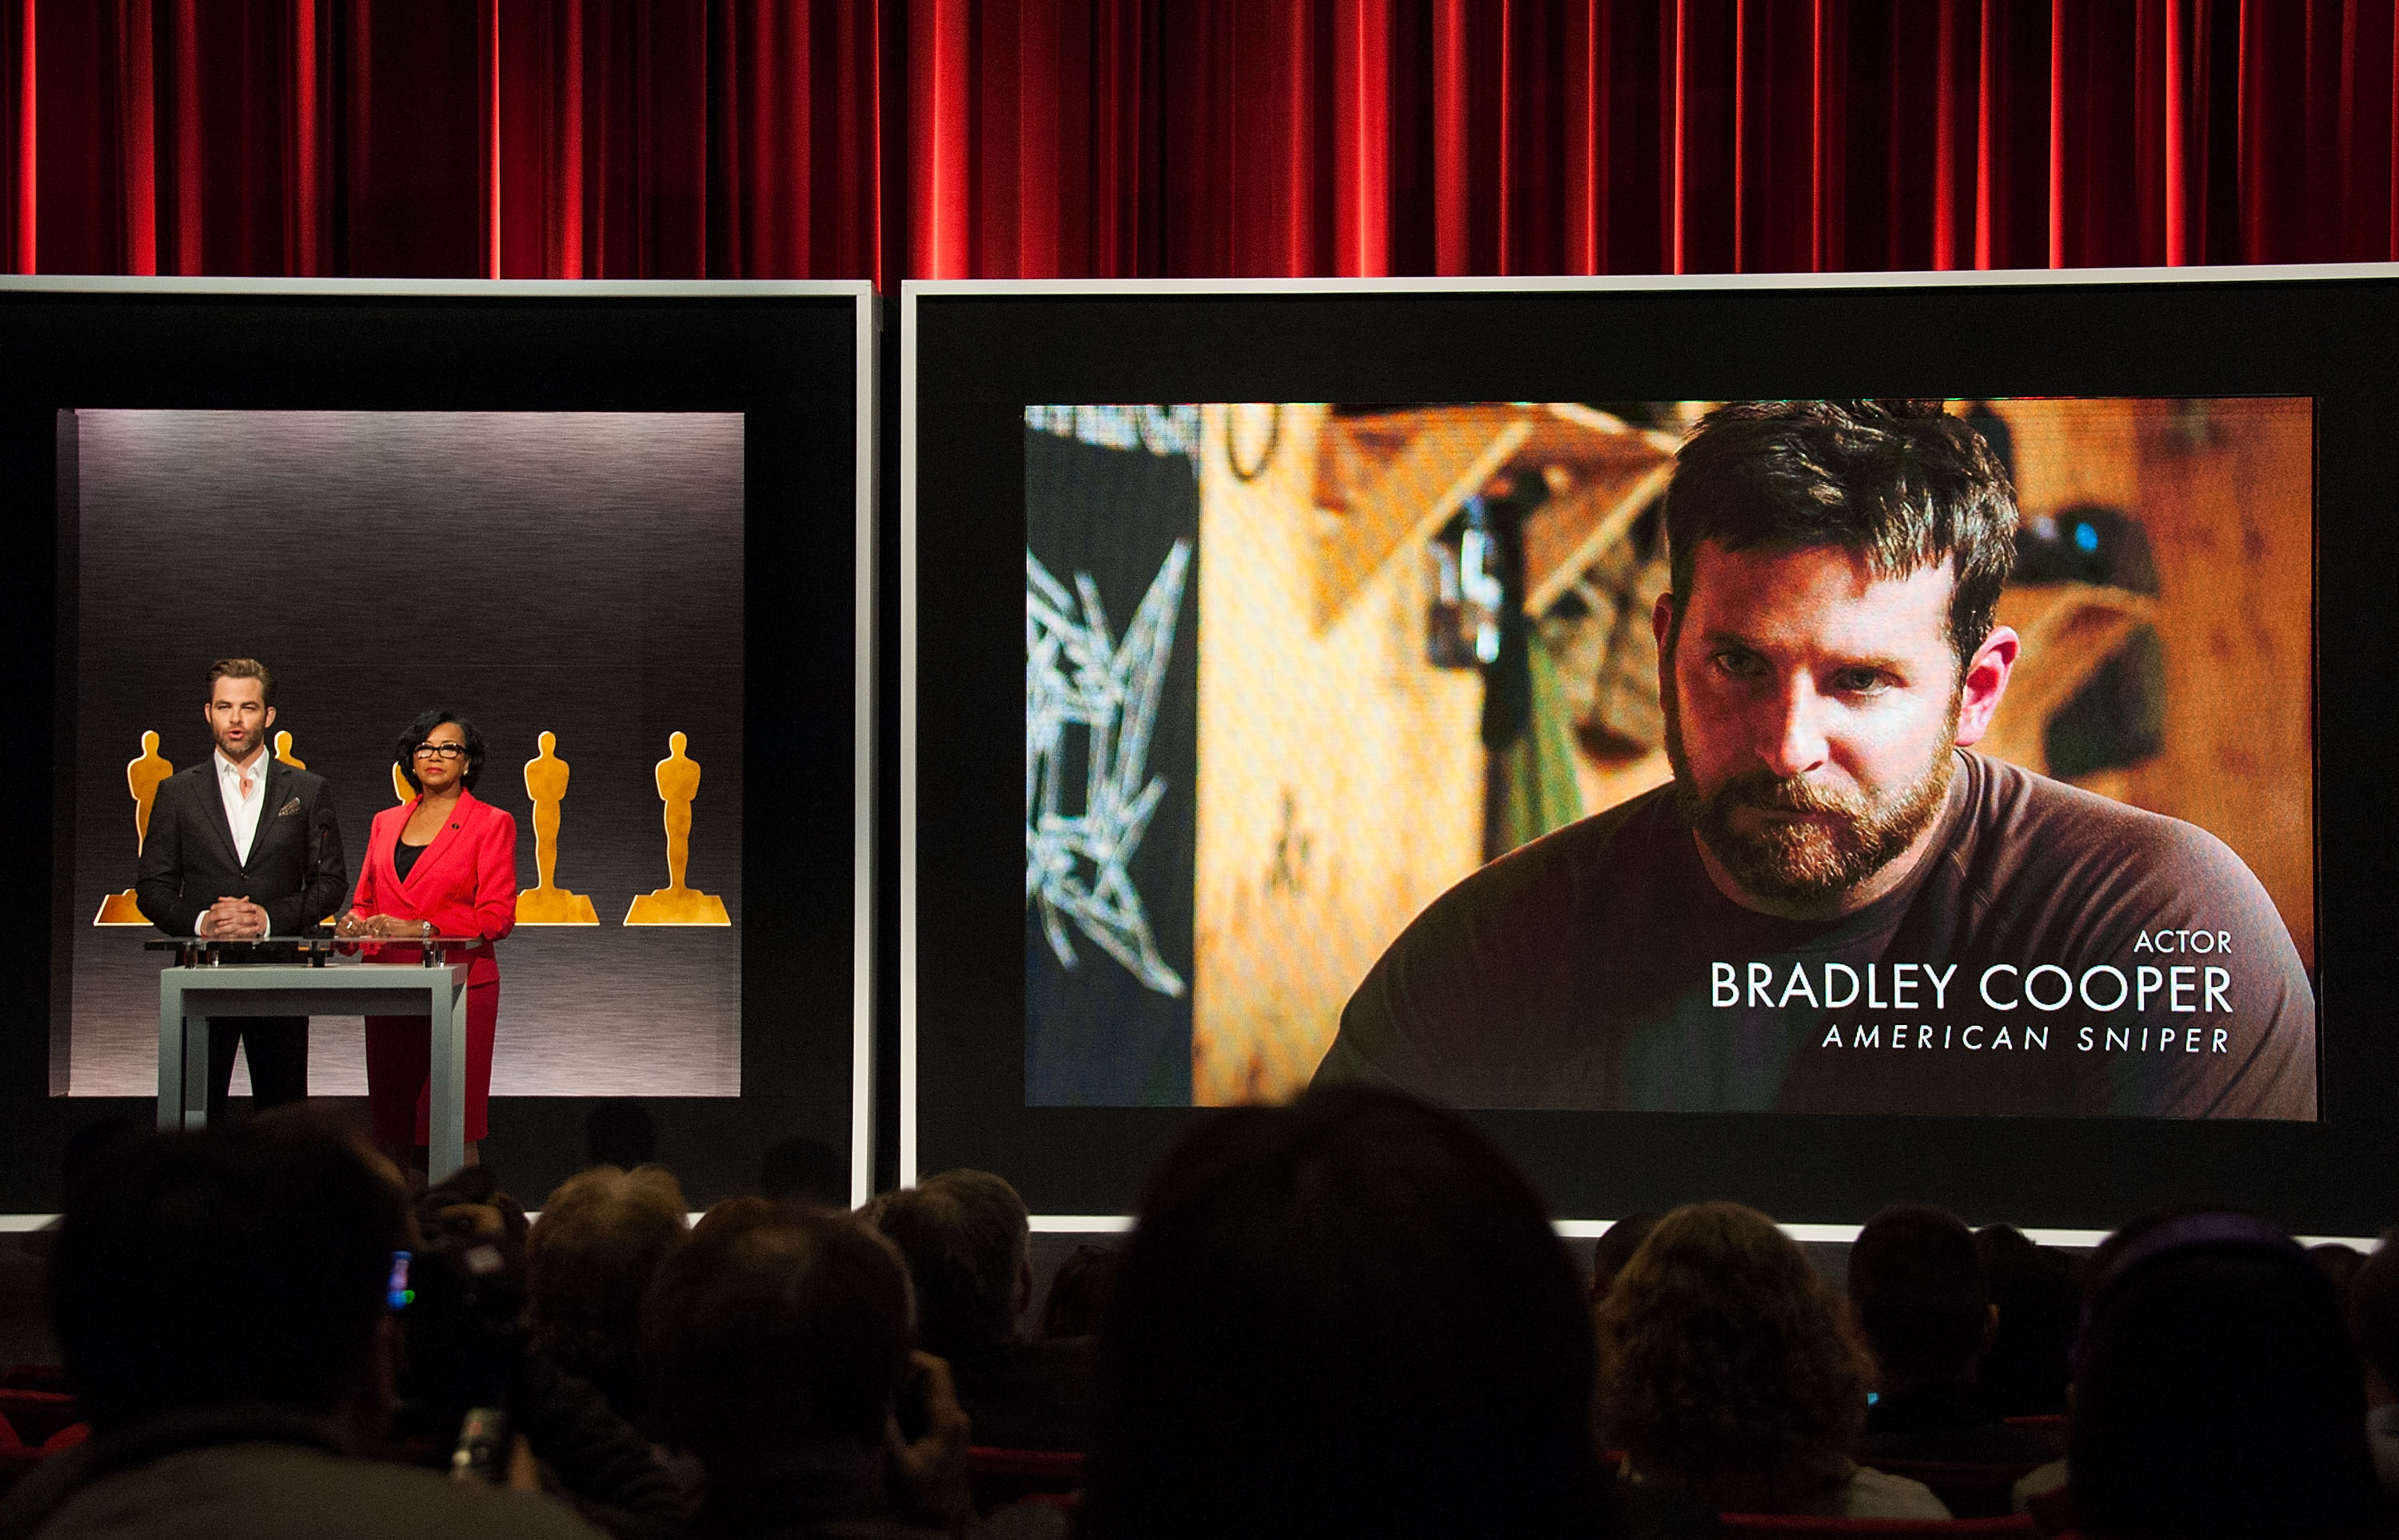 From left: Actor Chris Pine and Academy President Cheryl Boone Isaacs announce Bradley Cooper as a nominee for Best Actor in the film <i>American Sniper</i> at the 87th Academy Awards Nominations Announcement on Jan. 15, 2015 in Beverly Hills, California. (Valerie Macon—Getty Images)